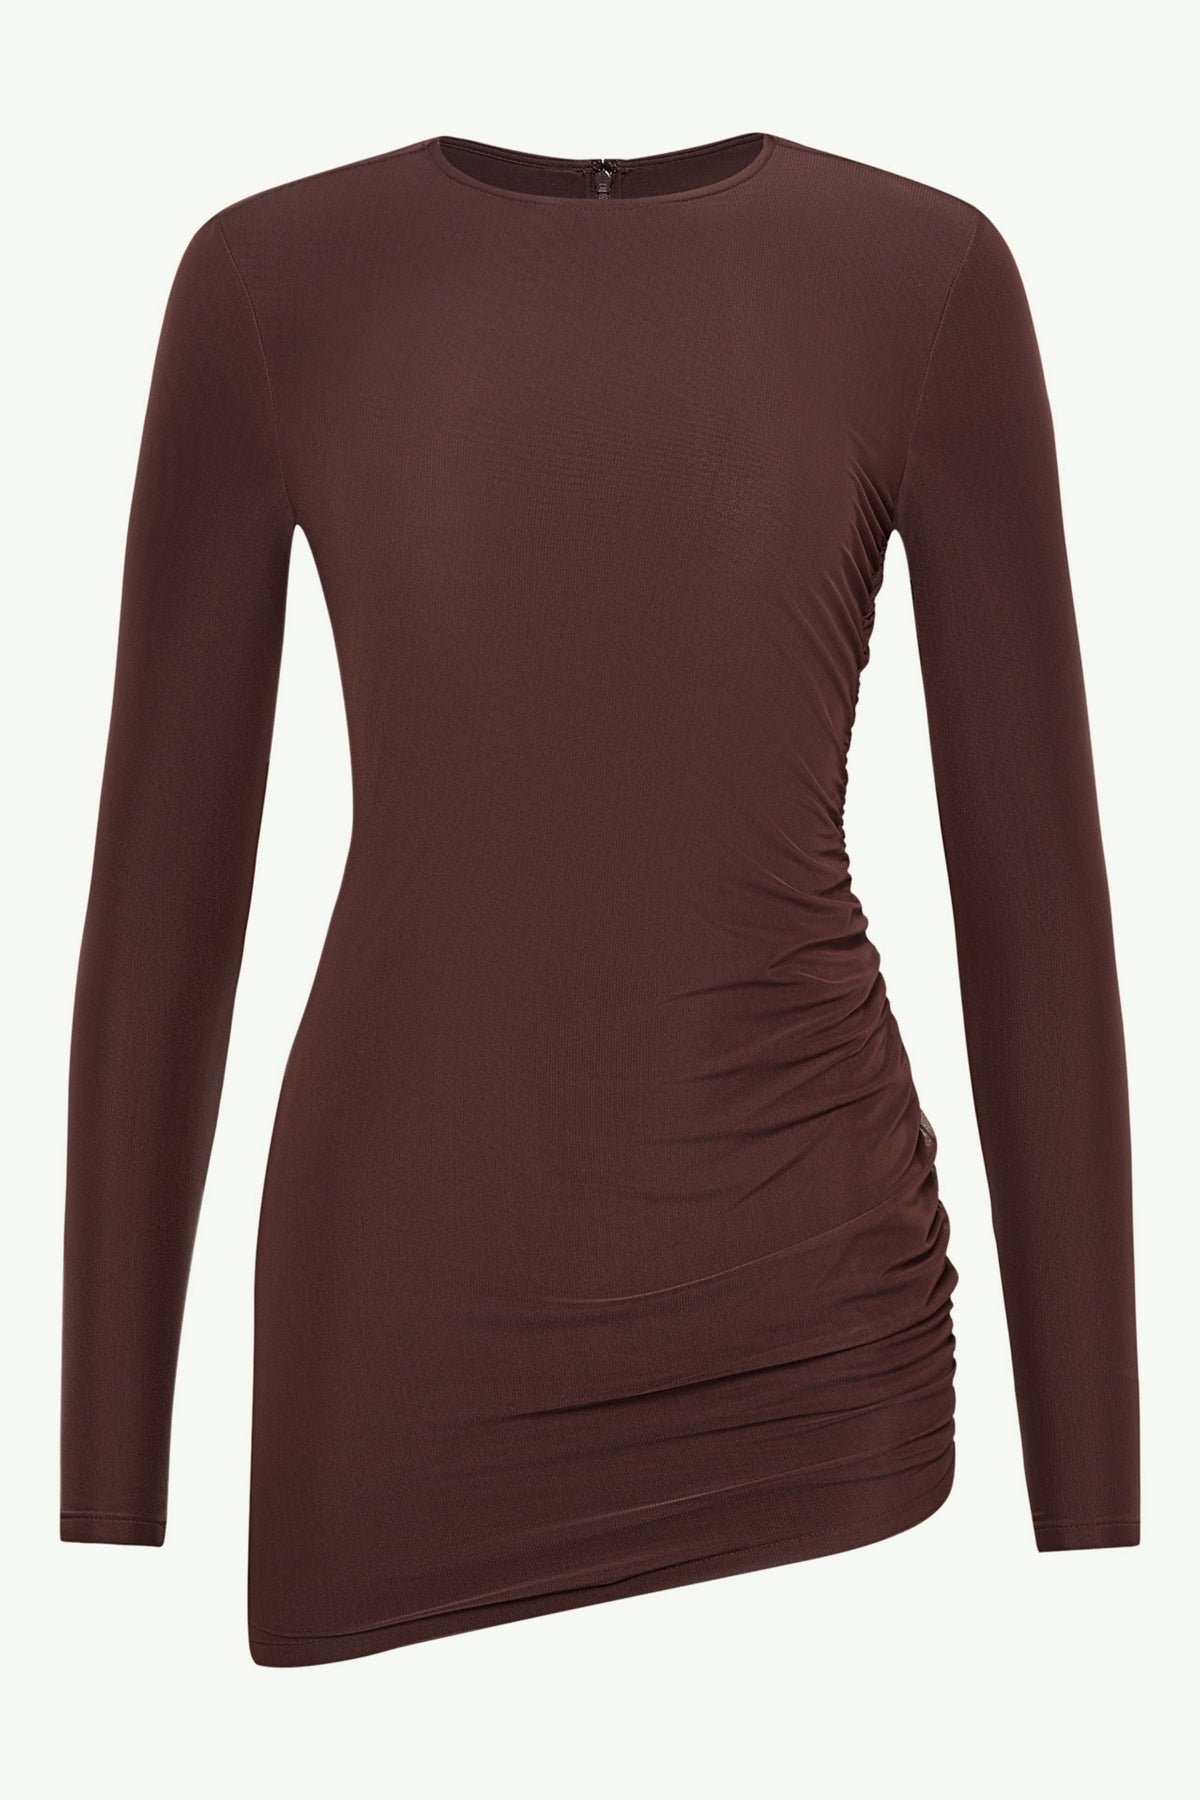 Mesh Rouched Top - Chocolate Plum Clothing epschoolboard 